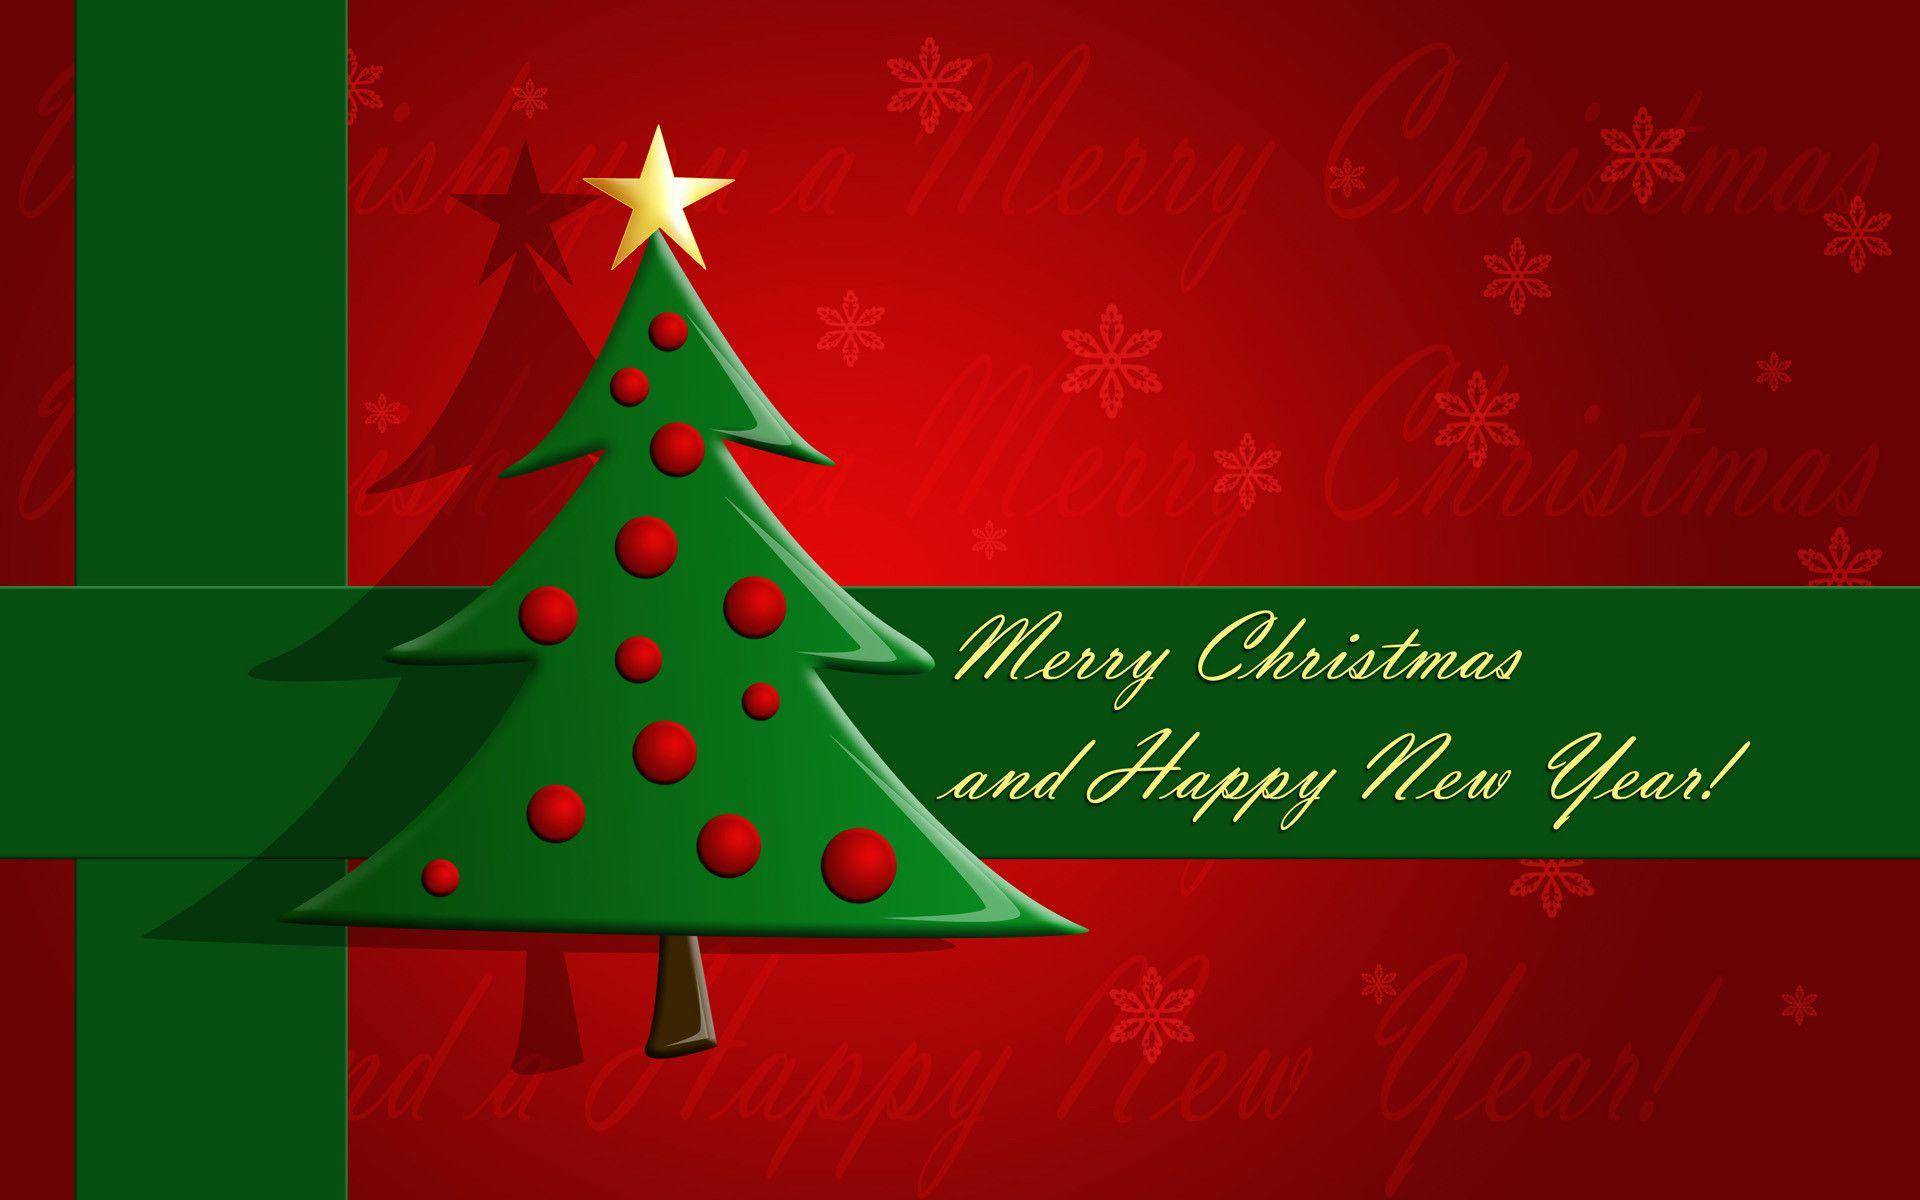 merry christmas and happy new year HD wallpaper HD background wallpaper free. Merry christmas image, Happy merry christmas, Merry christmas wallpaper